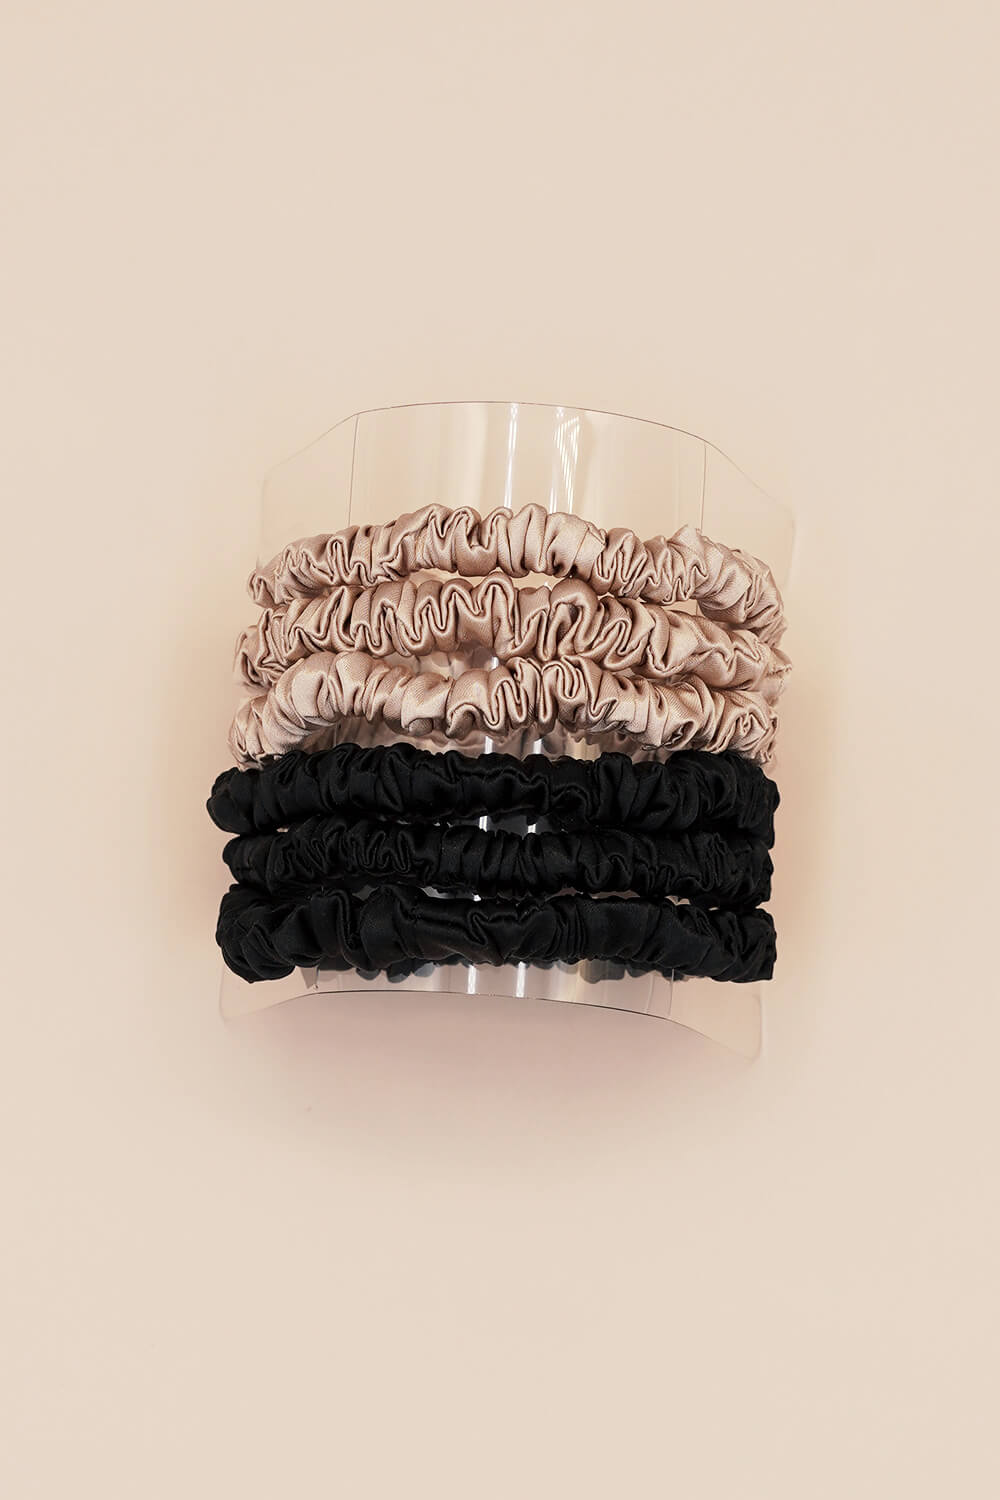 Silk Hair Ties Set of 6- The Most Wanted - BASK™